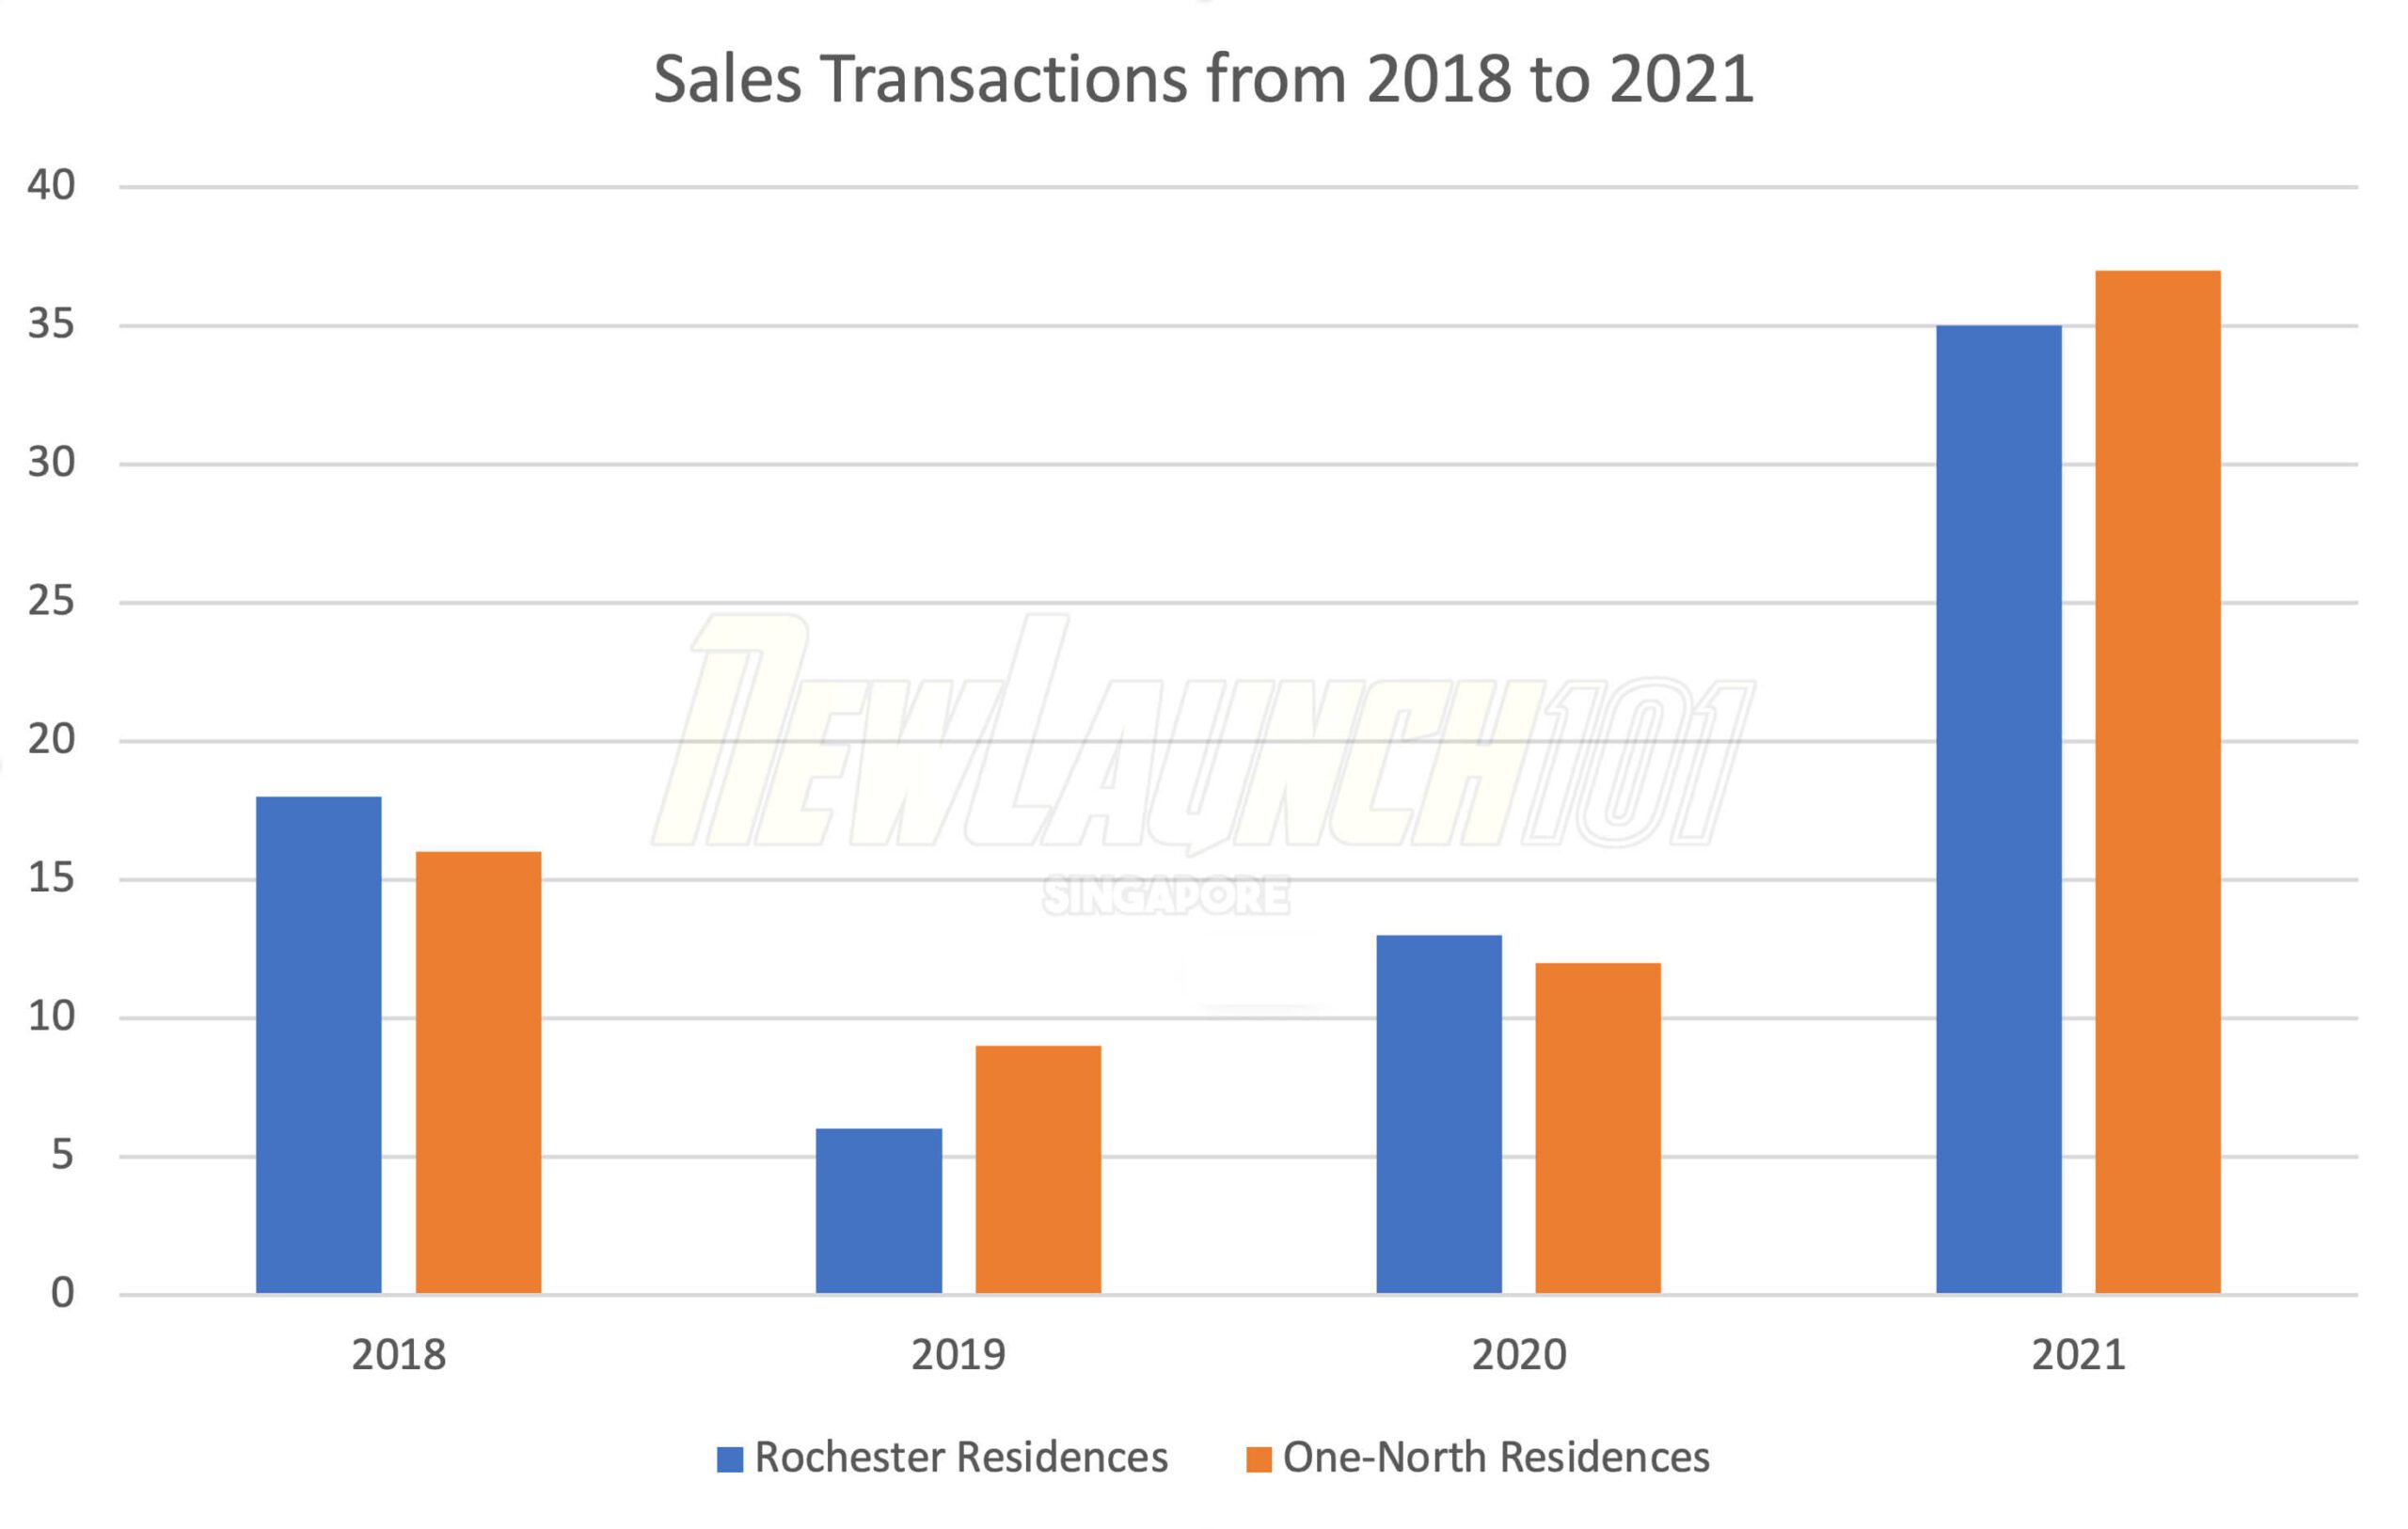 One-north Sales Transactions Data